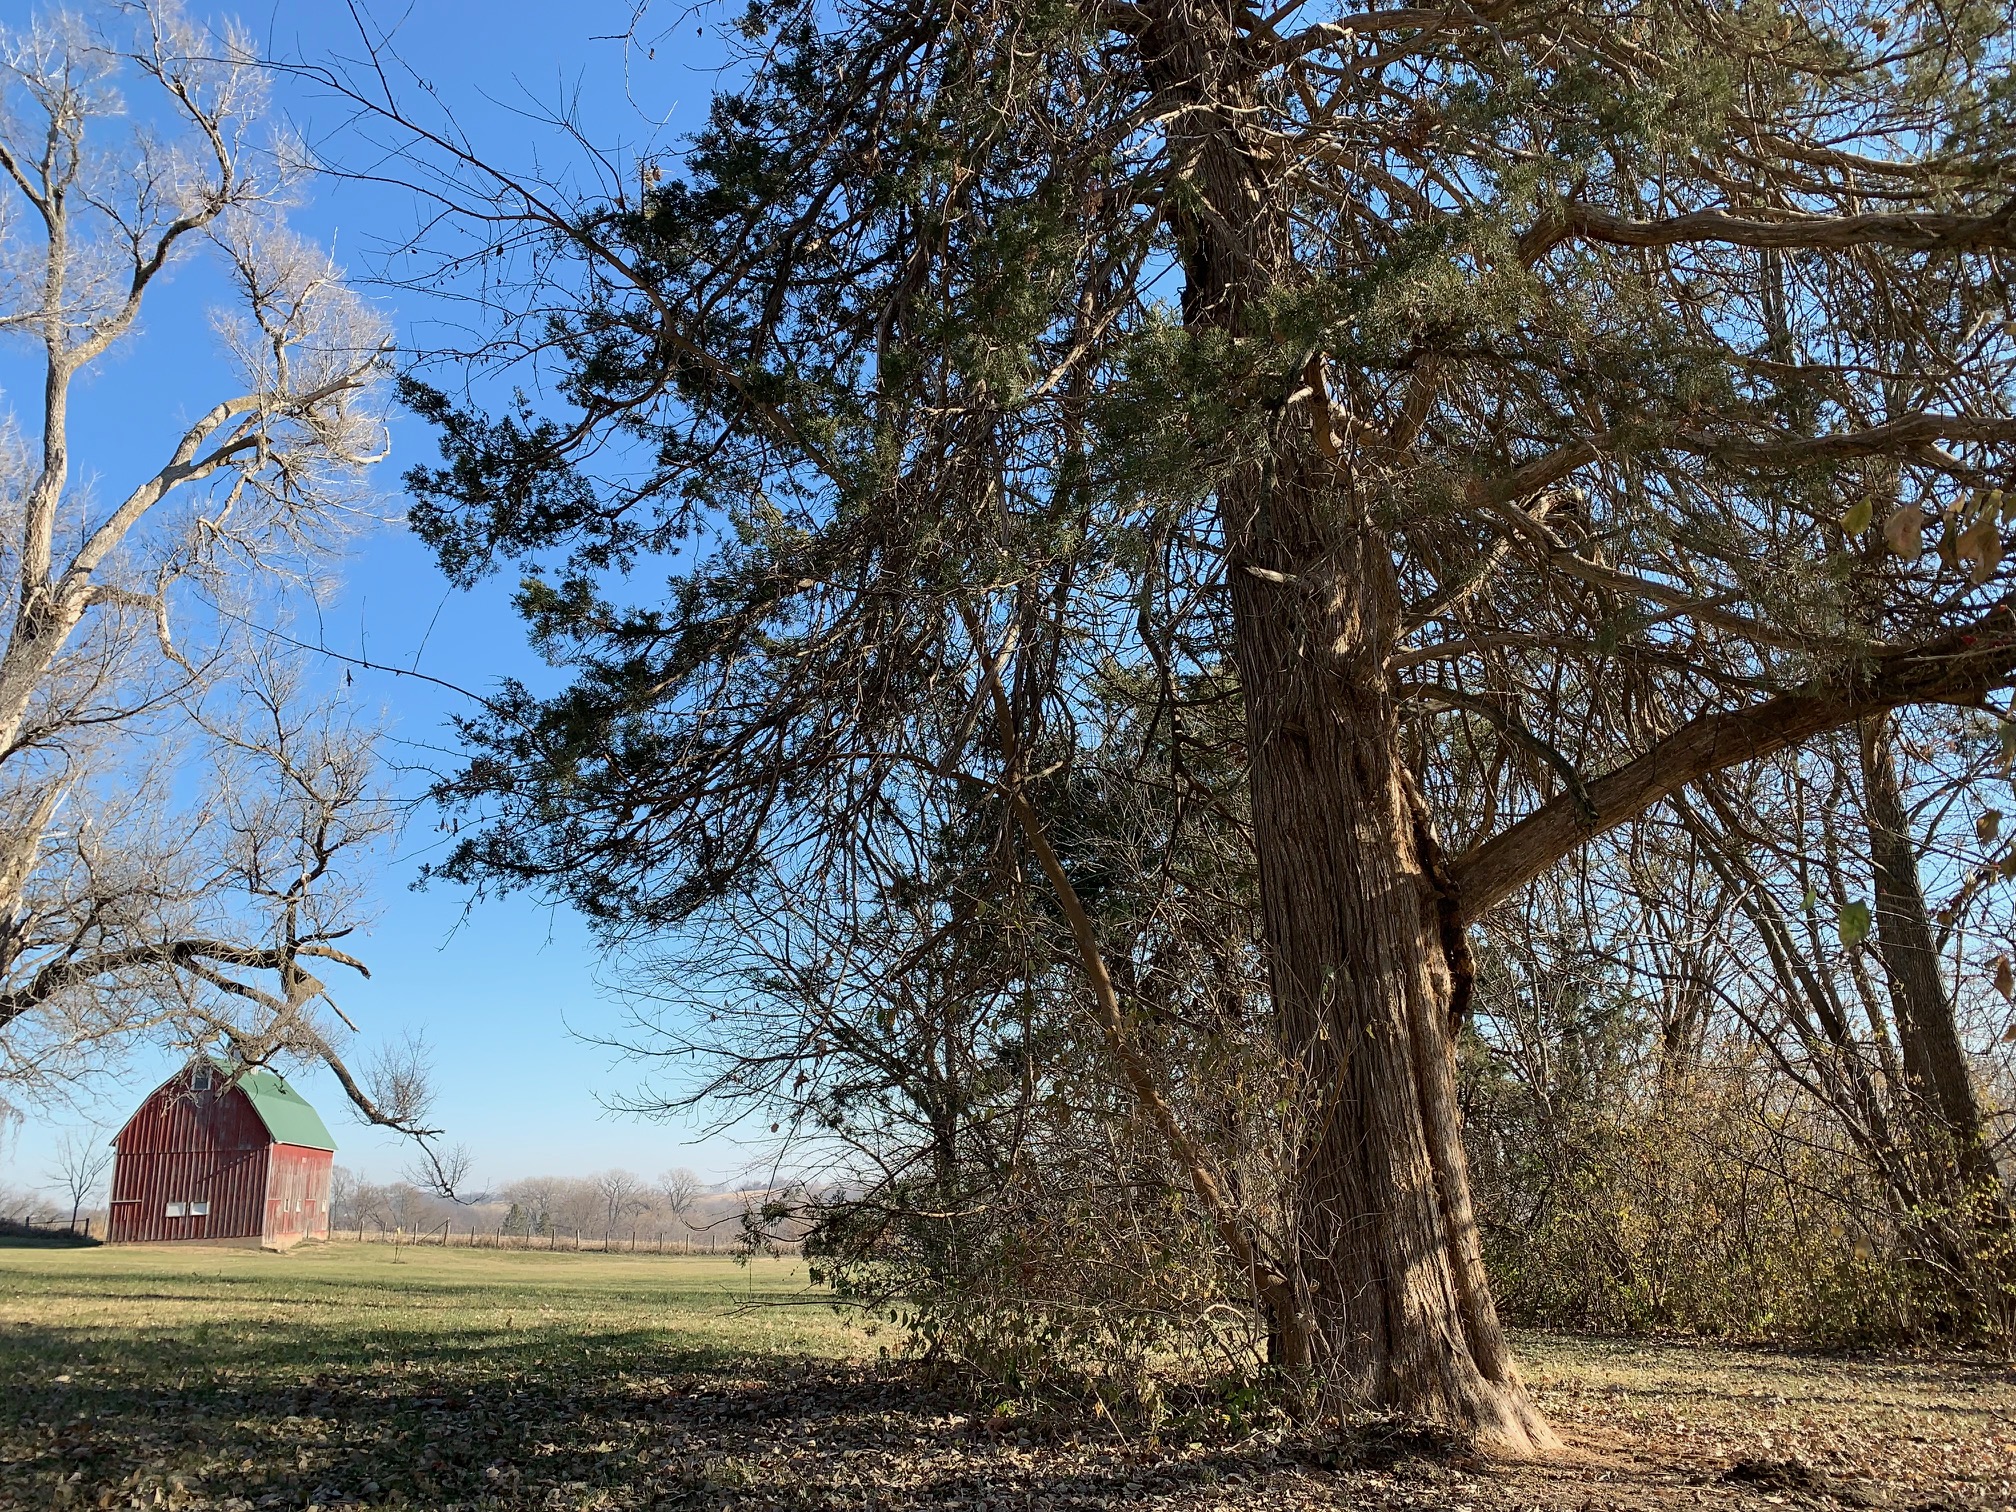 Eastern Red Cedar stands at the edge of an open field with a red barn in the background